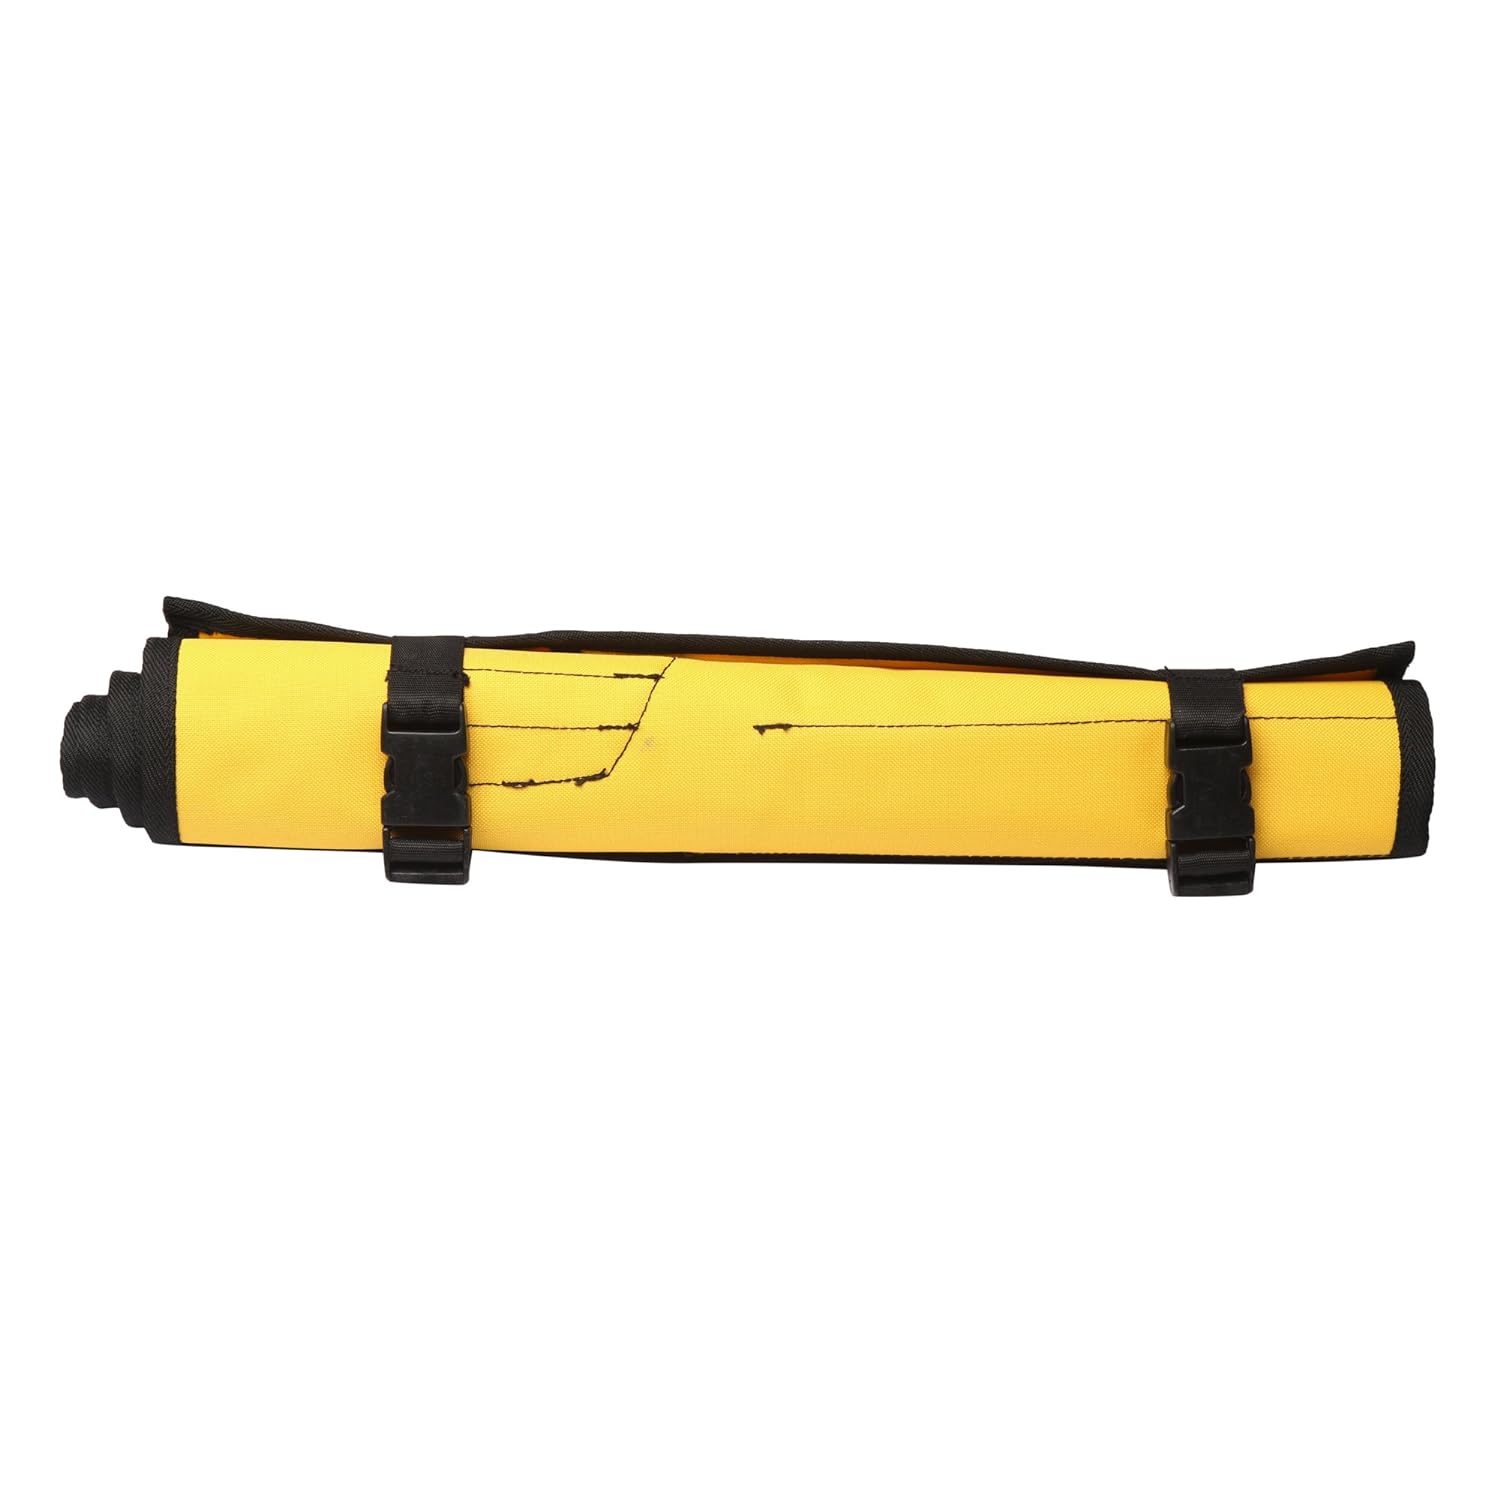 Bull Tools BT 18-404 Yellow 28 Pocket Wrench Roll HW 18 Oz. PVC Laminated Water Proof Ballistic Polyester Oxford Canvas